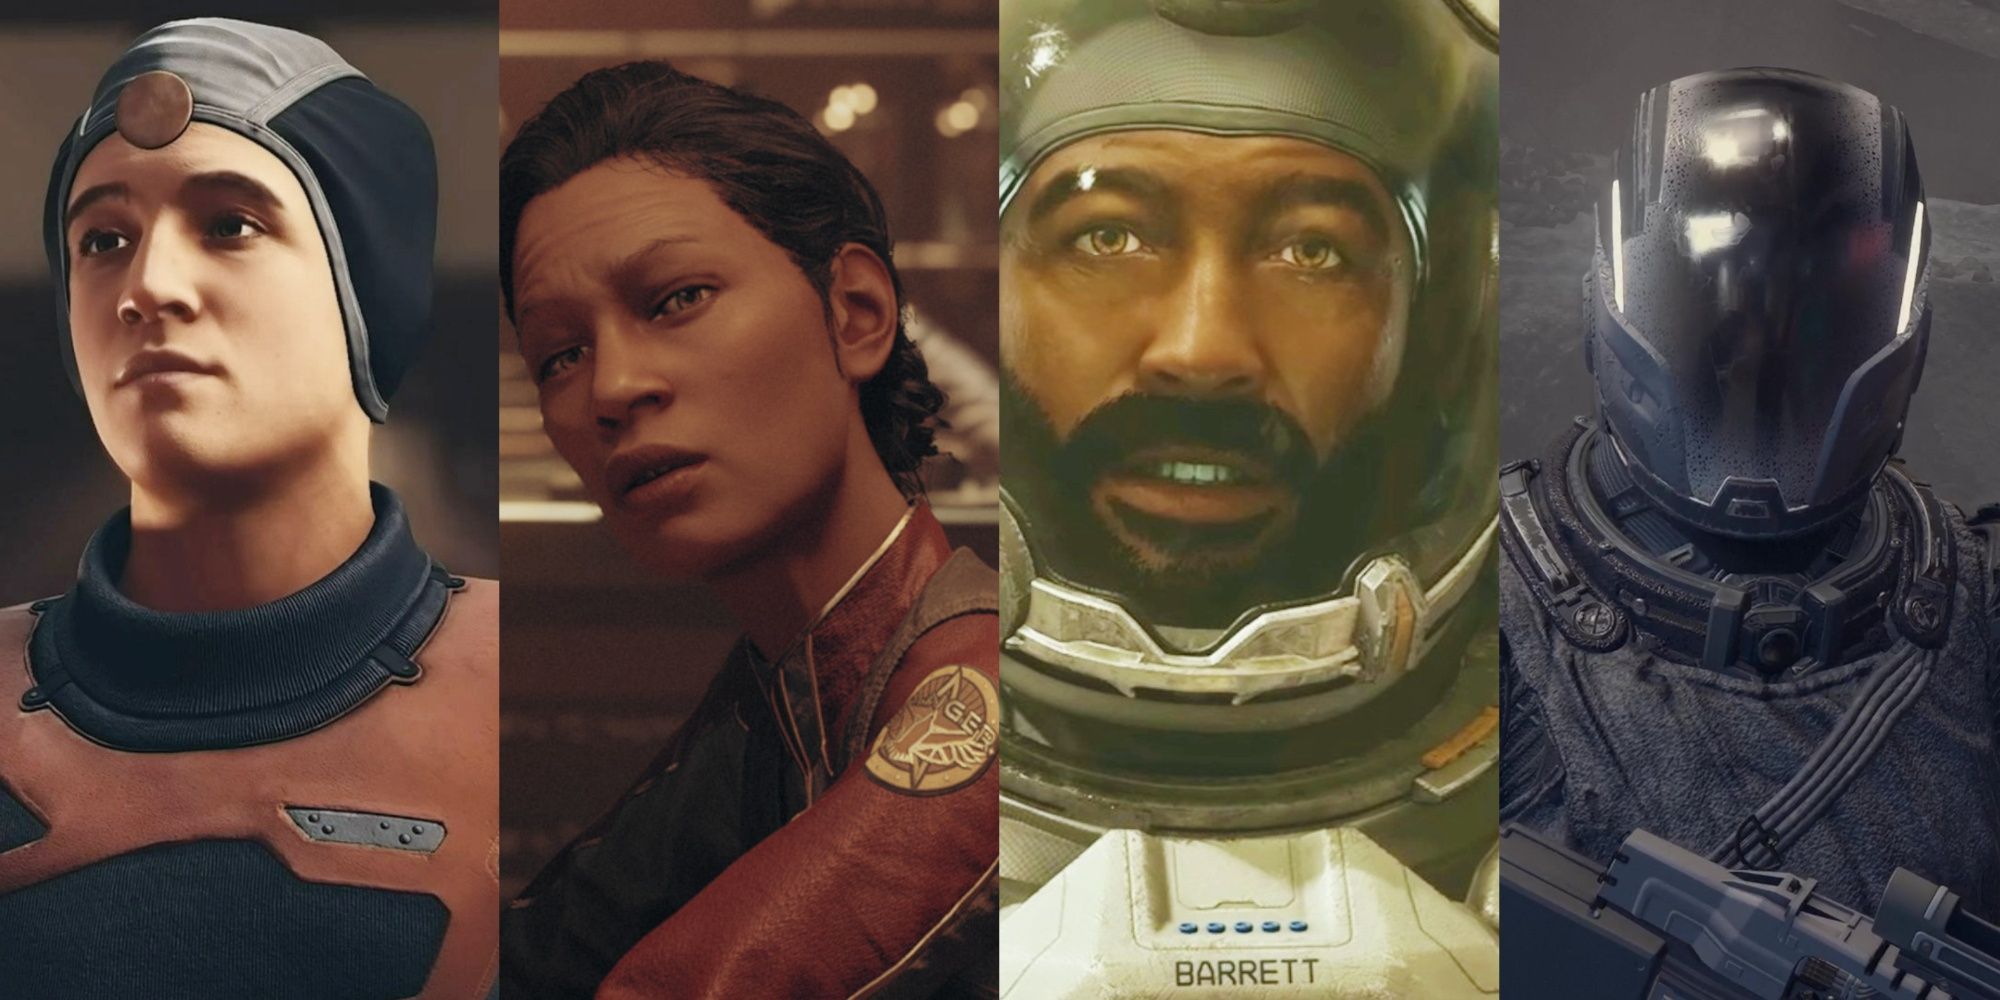 Starfield, Split Images Of Matteo, Emma, Barret, And The Hunter